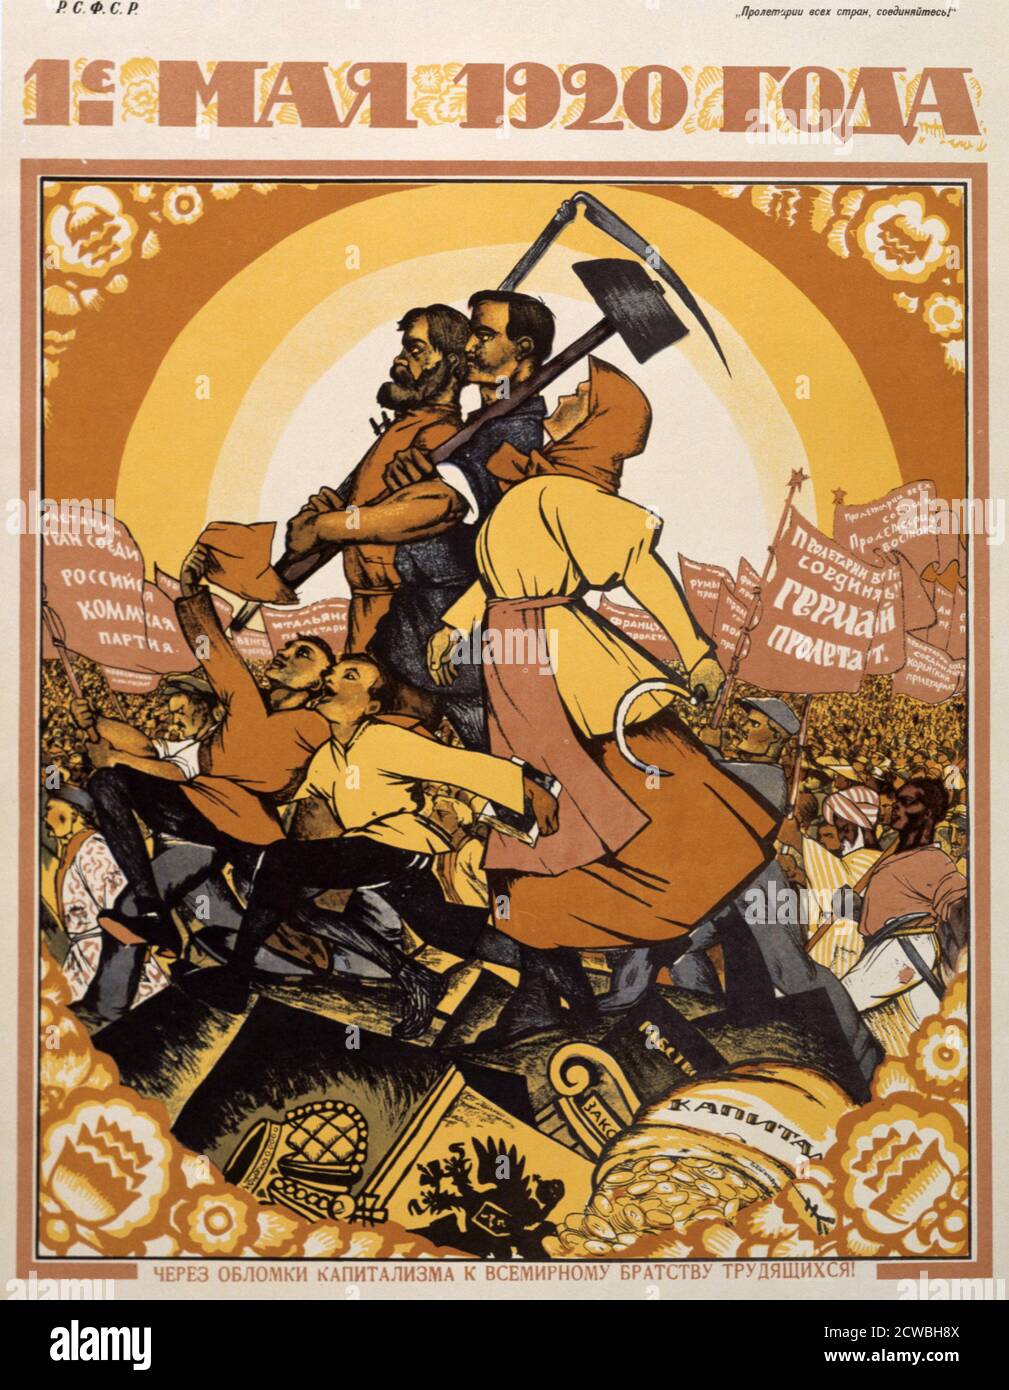 Soviet propaganda poster for May Day 1920. 'On the ruins of capitalism the fraternity of peasants and workers marches against the peoples of the world'. Artist, Nicolas Kotcherguine. Soviet Social Realism. Stock Photo